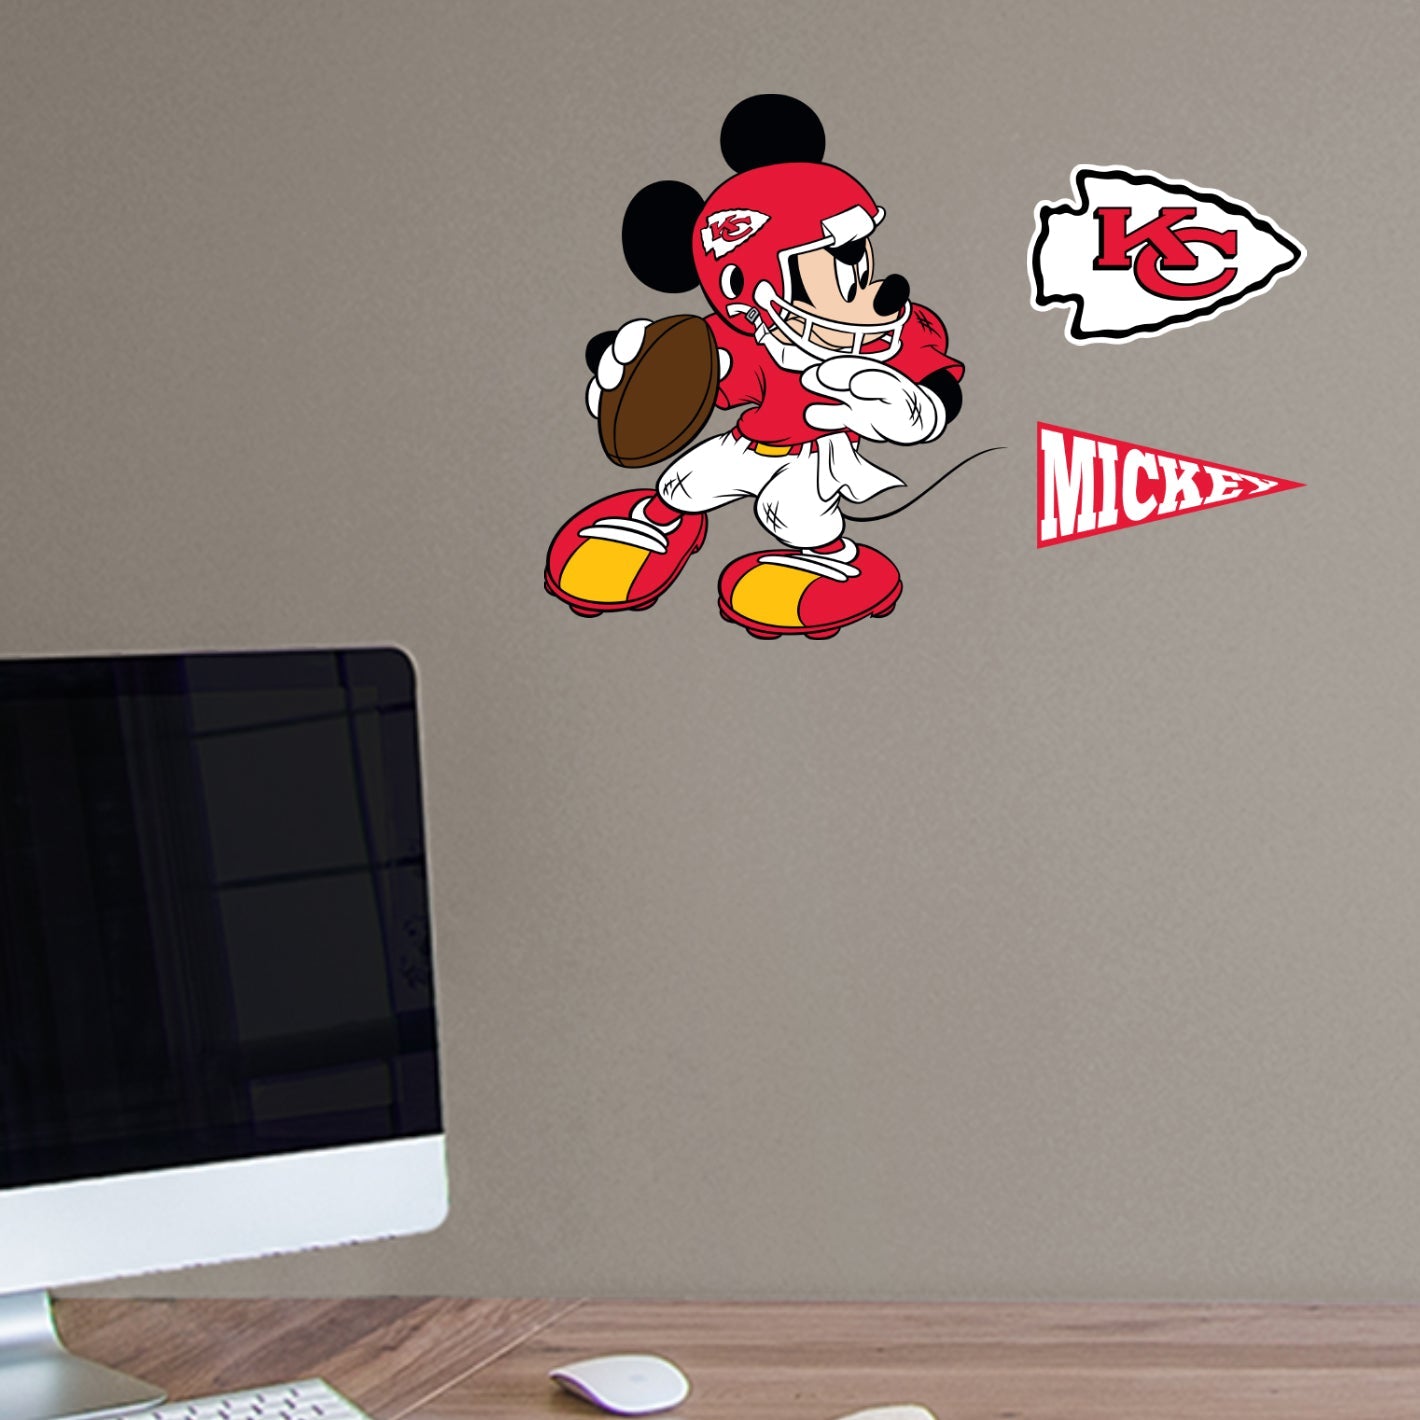 Kansas City Chiefs: Mickey Mouse - Officially Licensed NFL Removable Adhesive Decal